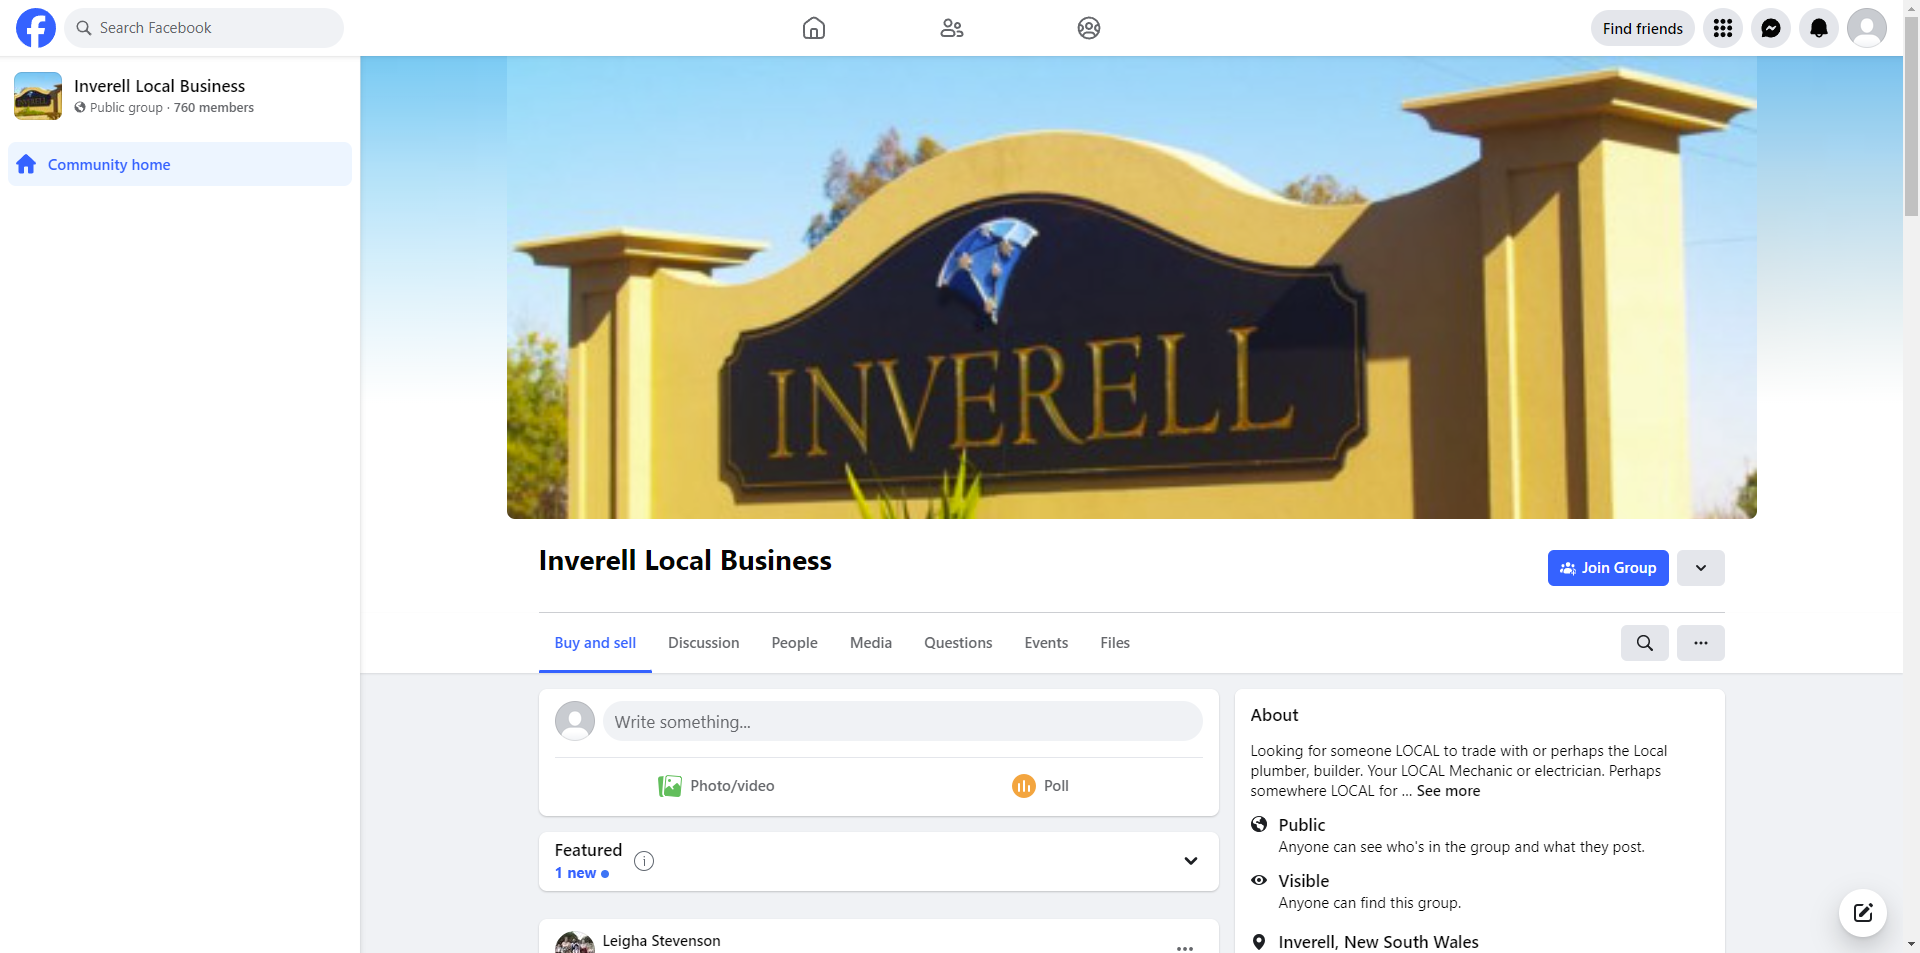 Inverell Local Business